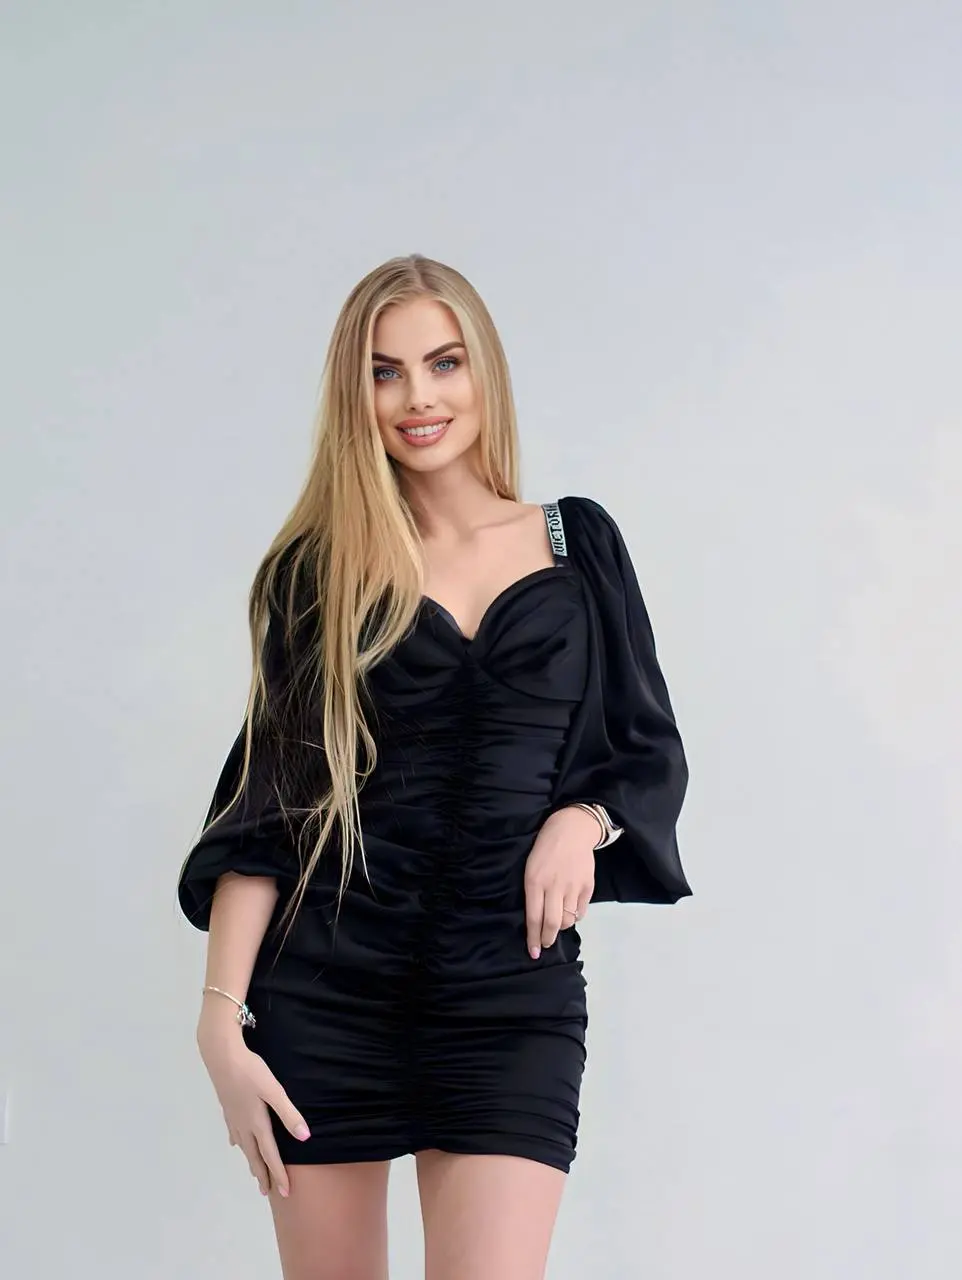 Polina how to find brides